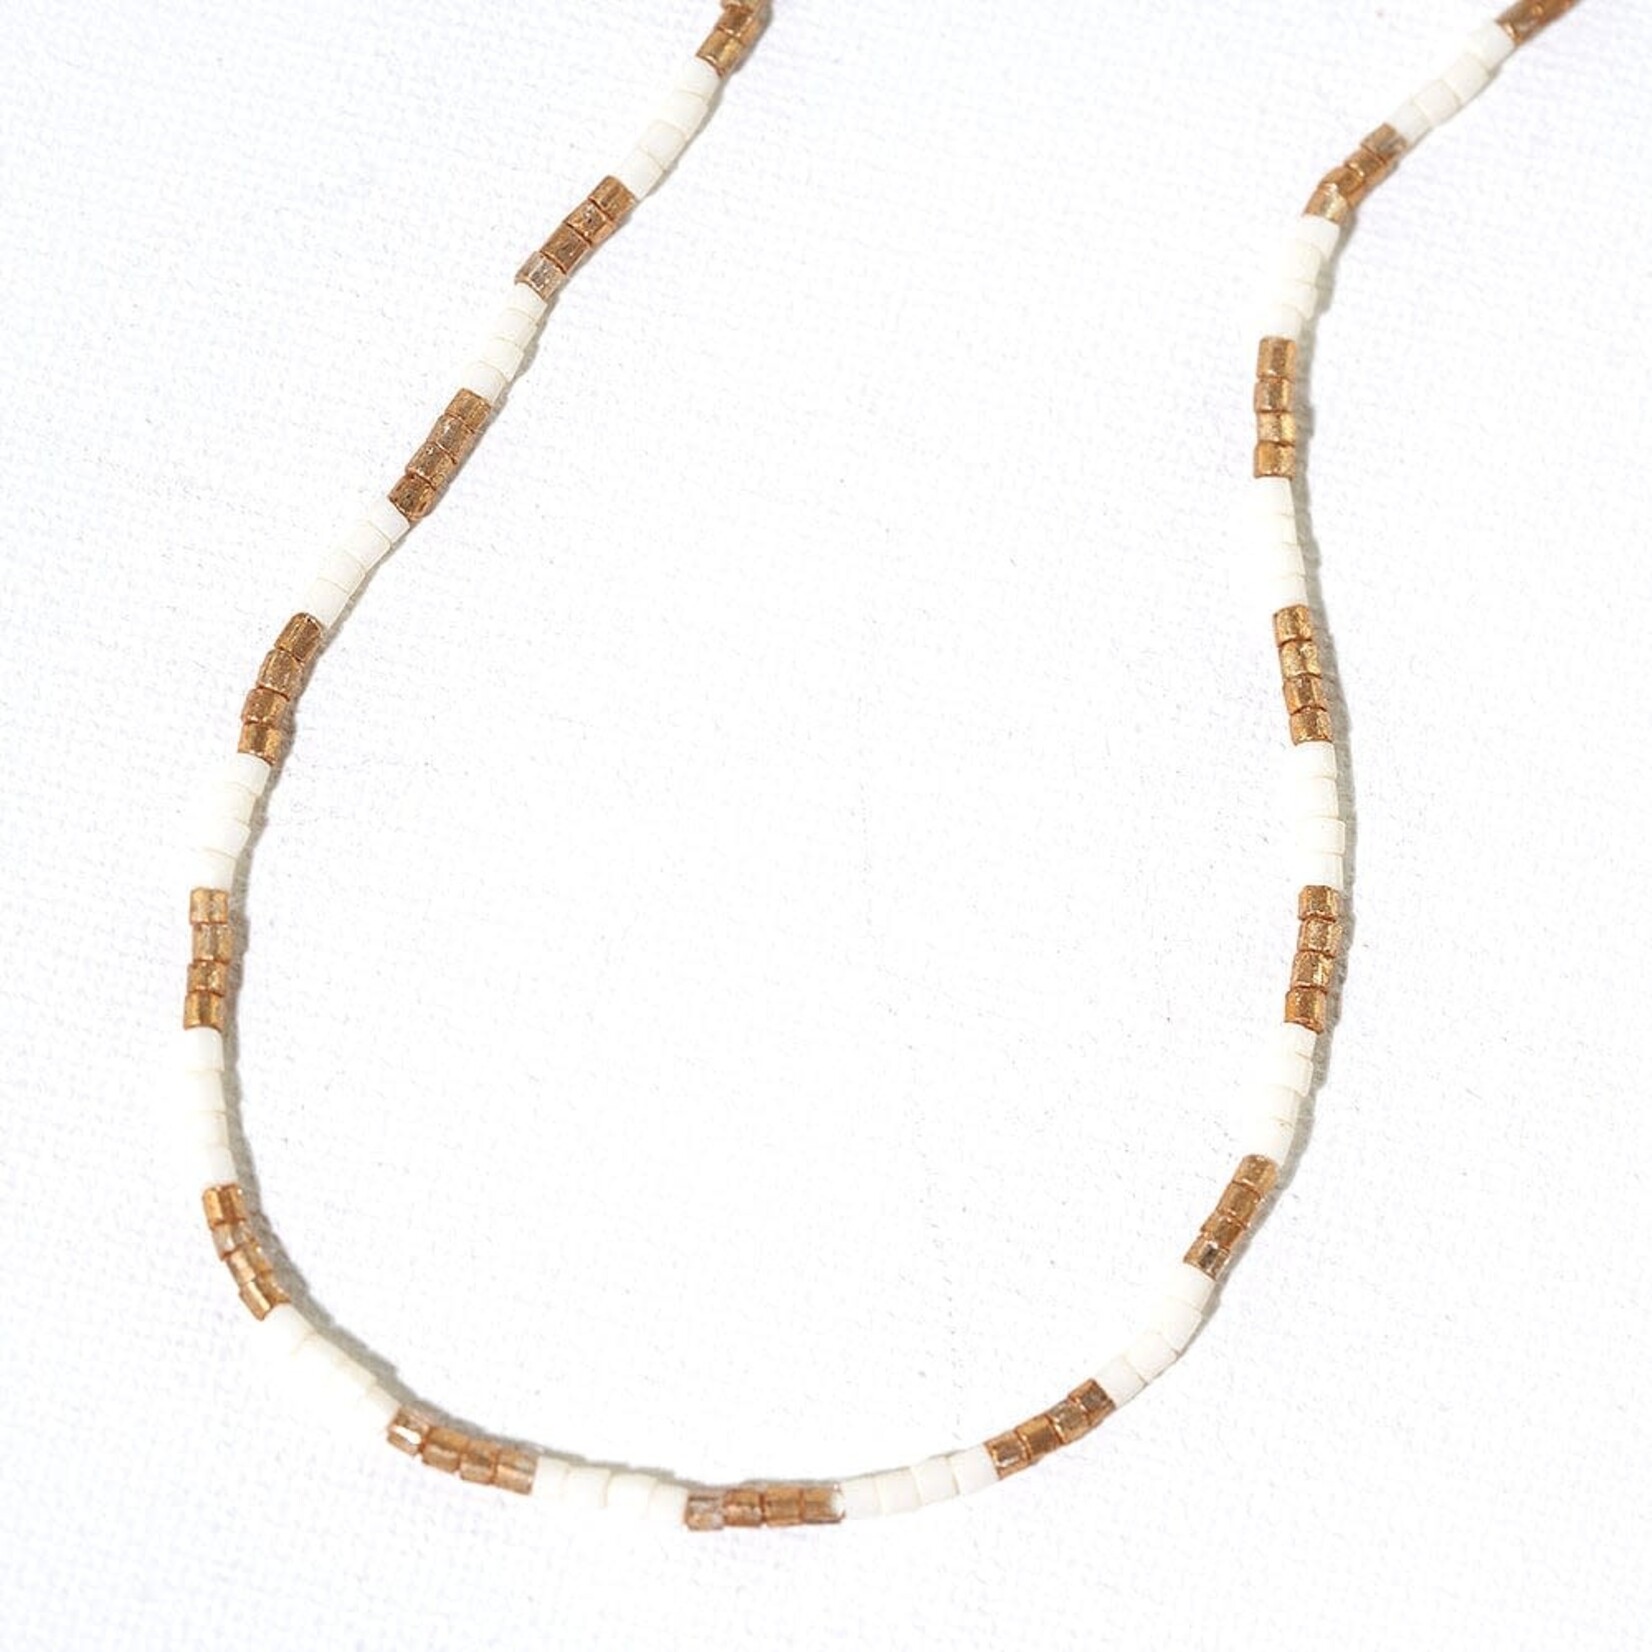 Ink + Alloy Single Strand 2Mm Luxe Bead Necklace Rainbow